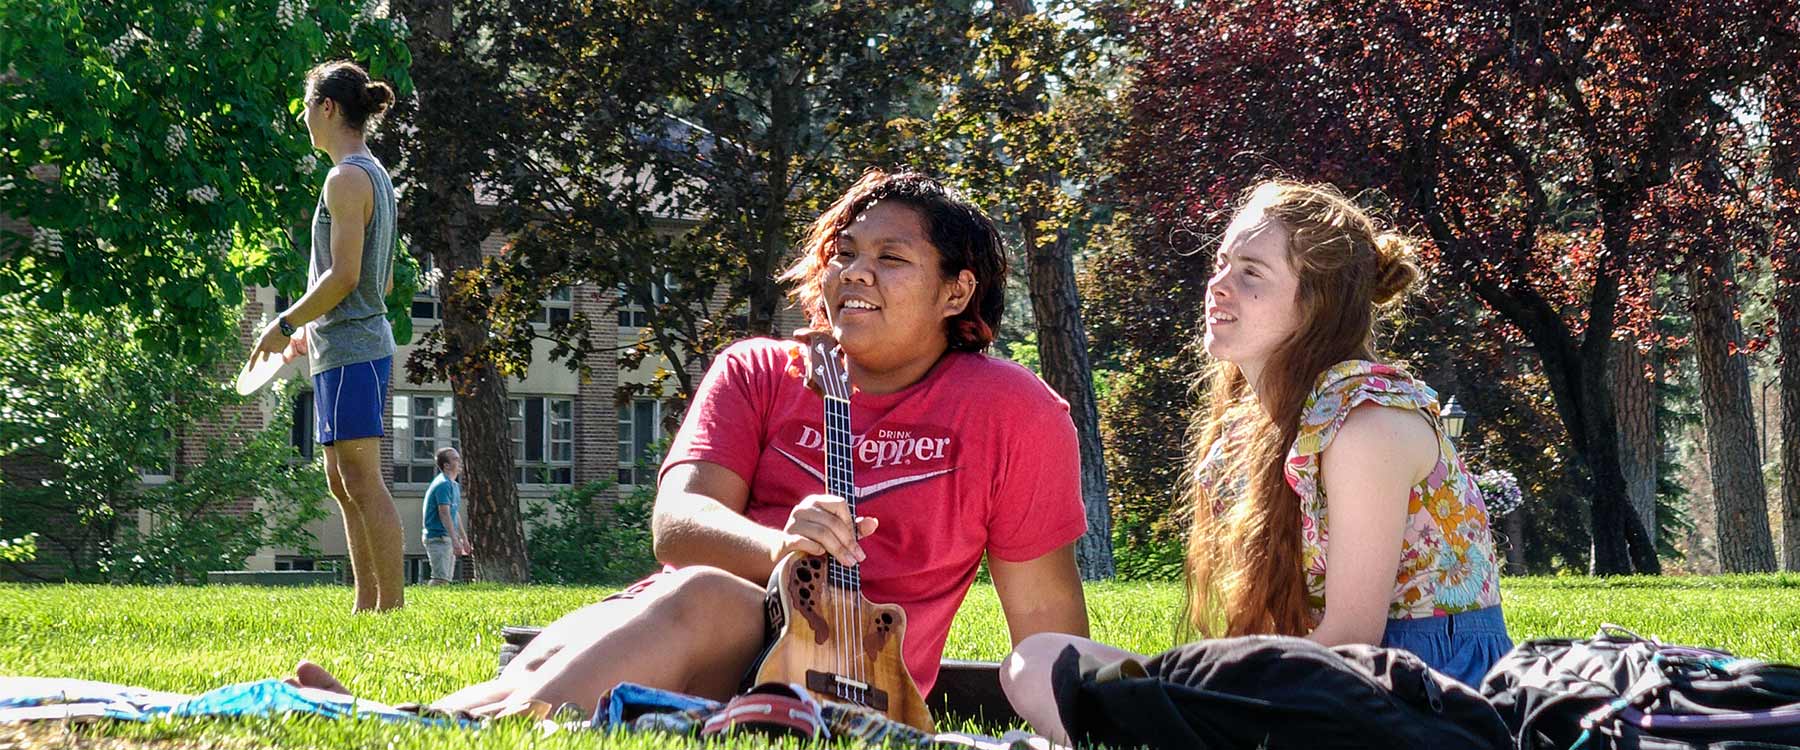 Two students sit in the grass and two are seen in the distance, playing Frisbee, on a warm day.